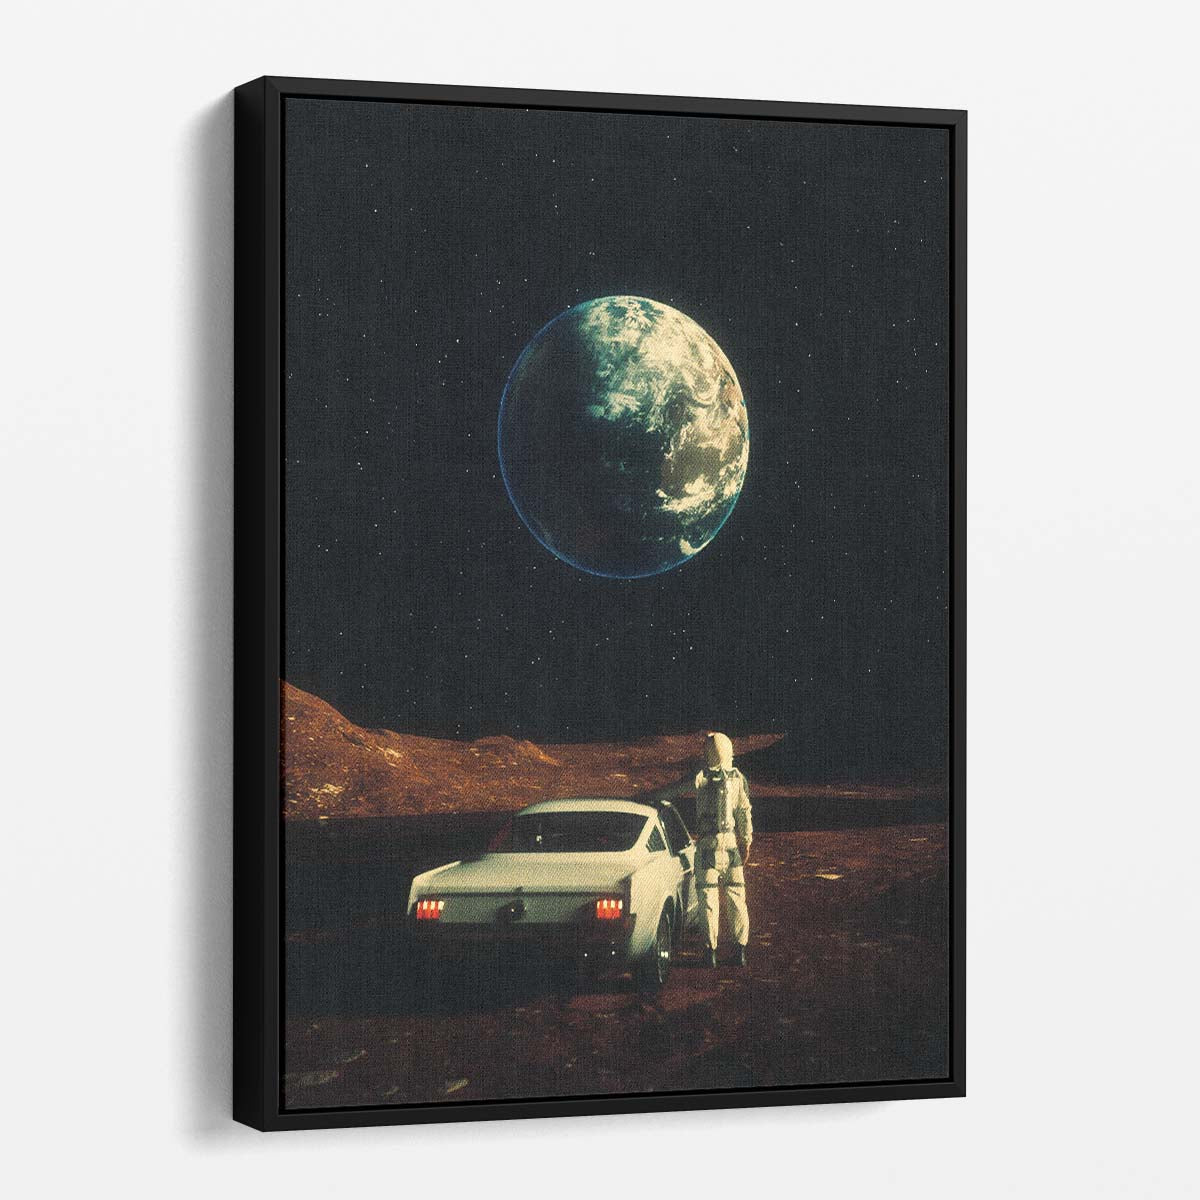 Far From Home Futuristic Space Travel Collage Art by Taudalpoi by Luxuriance Designs, made in USA